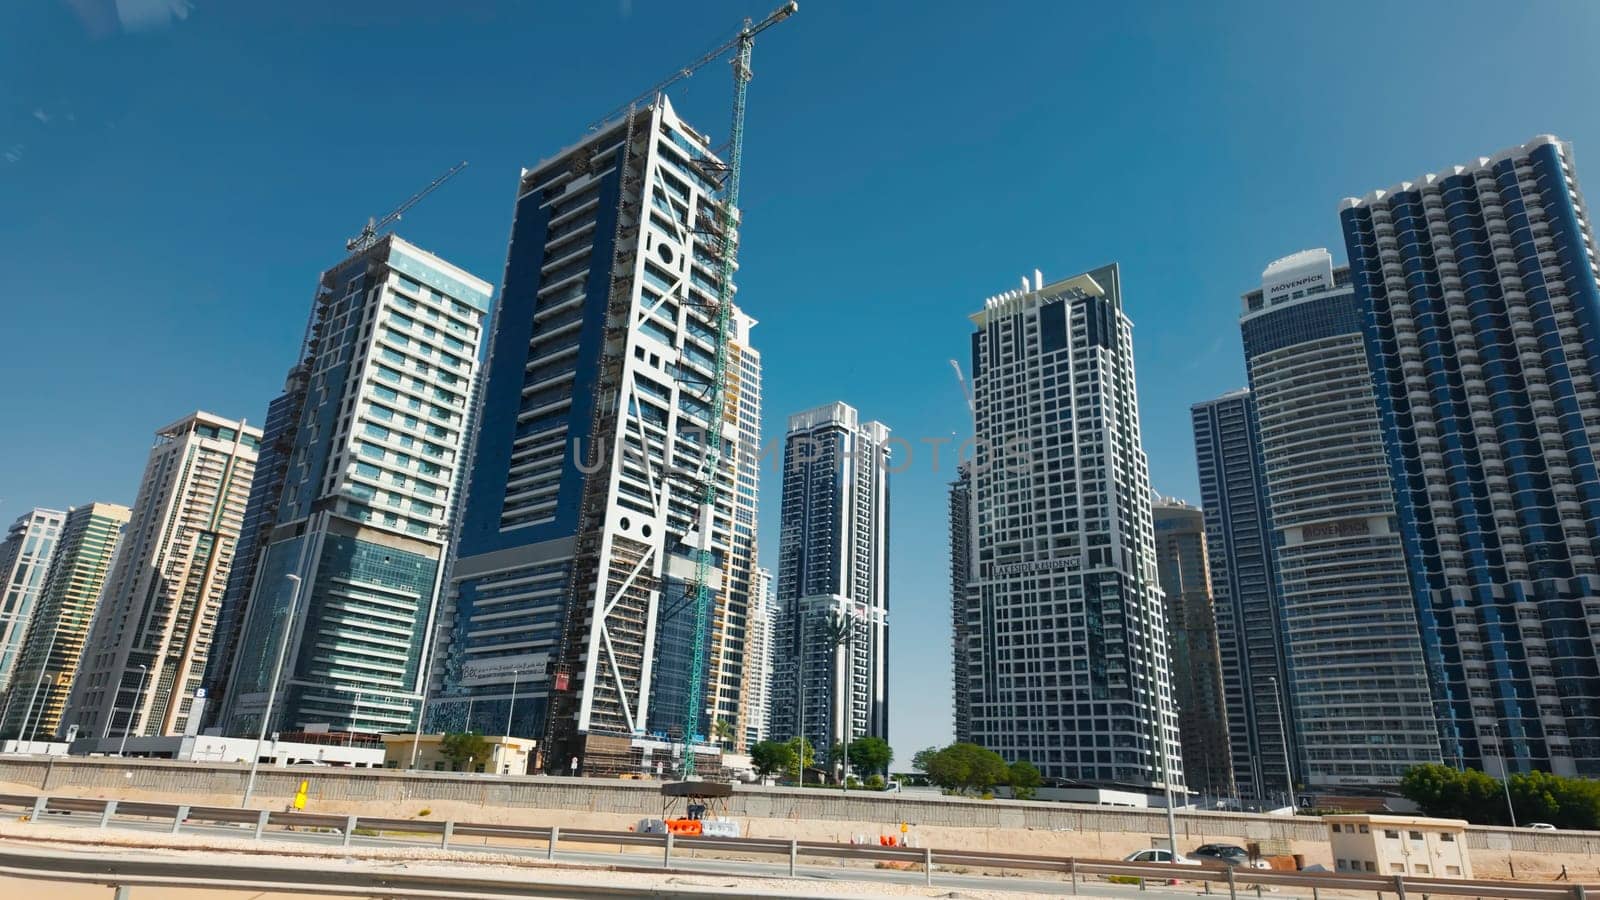 Dubai city with street and bridge with driving cars. Action. Clear blue sky and skyscrapers of the city center